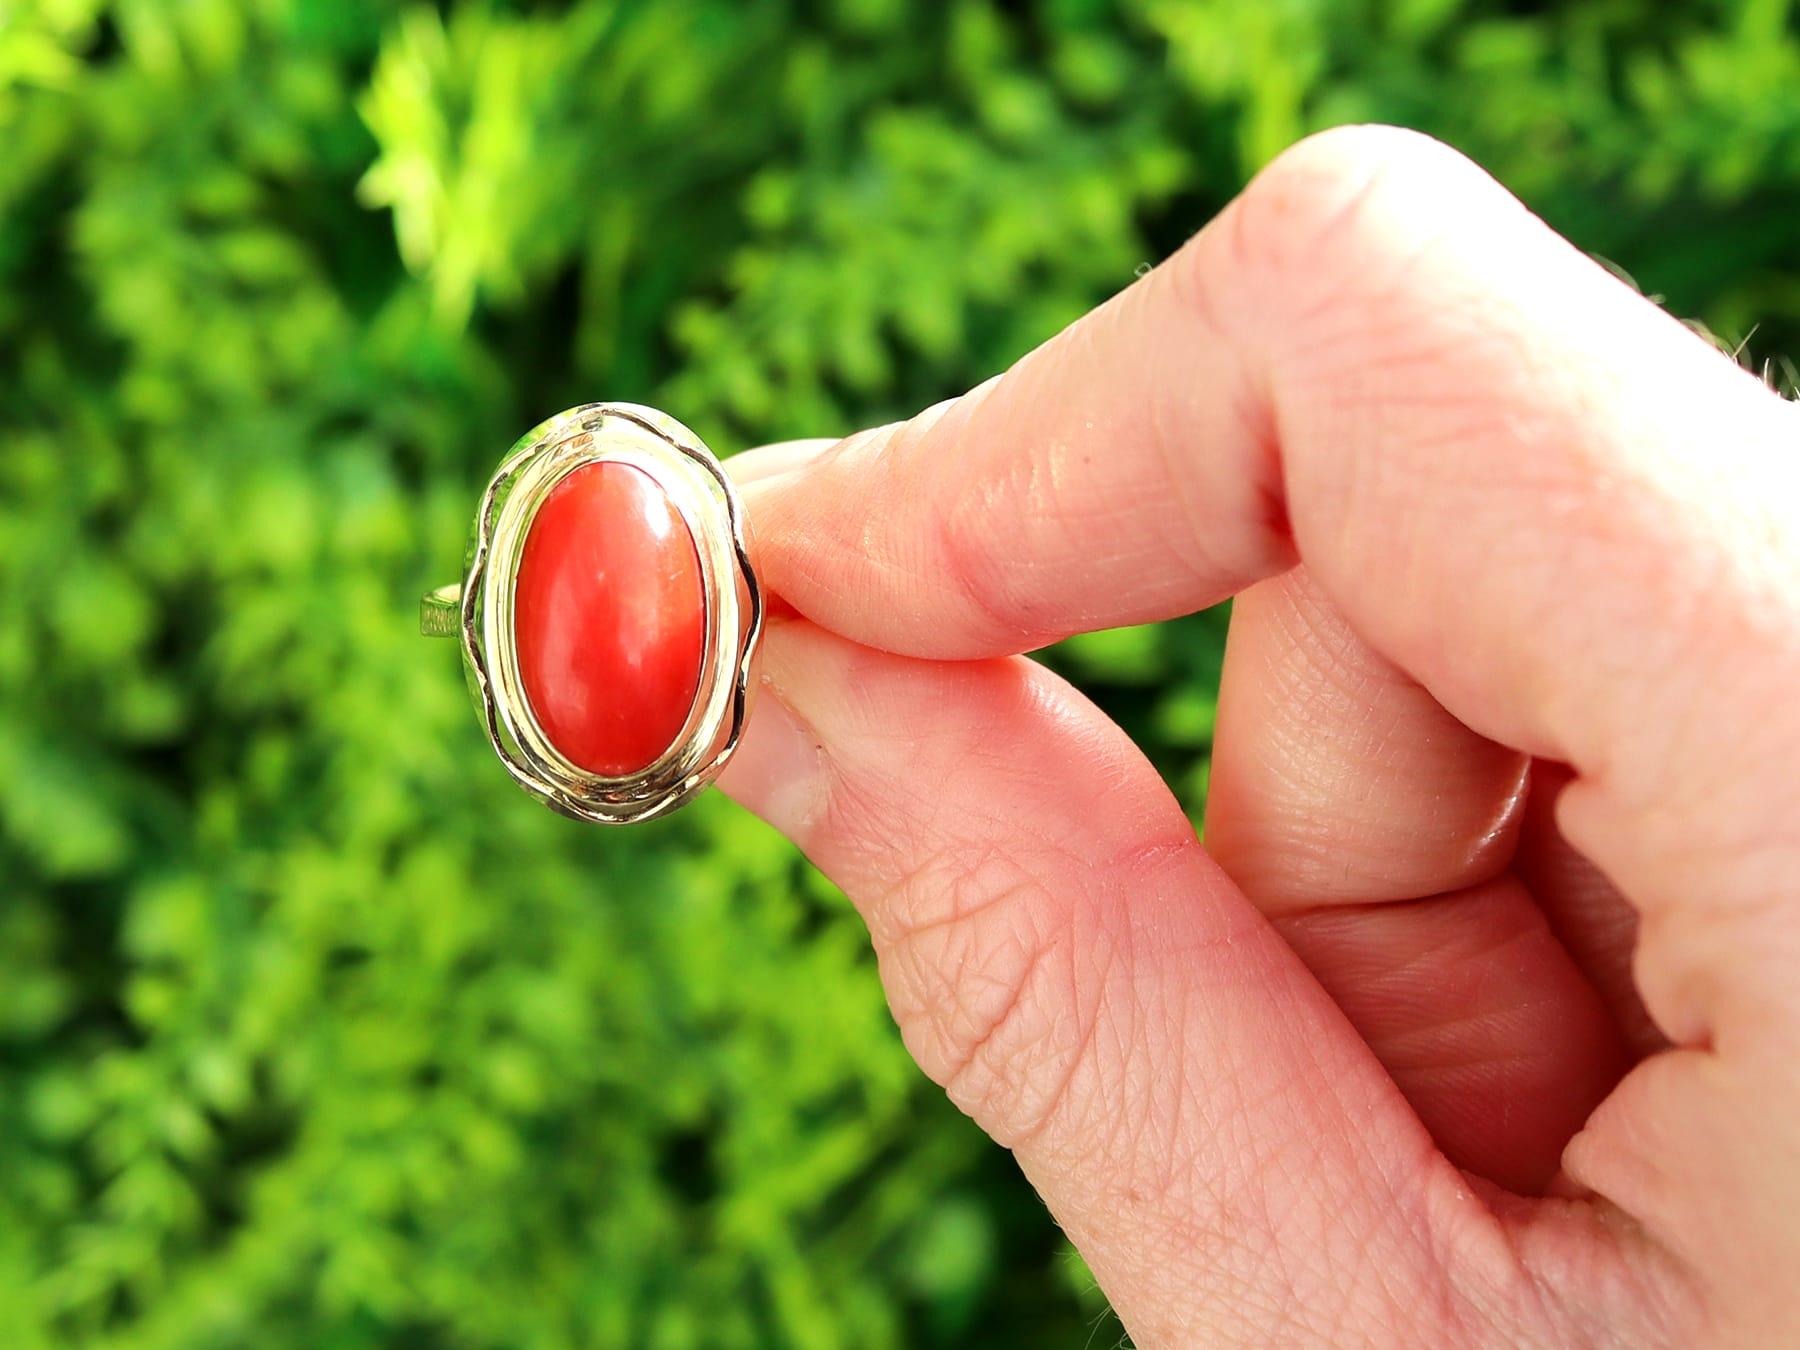 A fine and impressive vintage natural coral and 14 karat yellow gold cocktail ring; part of our vintage jewelry and estate jewelry collections.

This fine and impressive vintage cabochon cut coral ring has been crafted in 14k yellow gold.

The